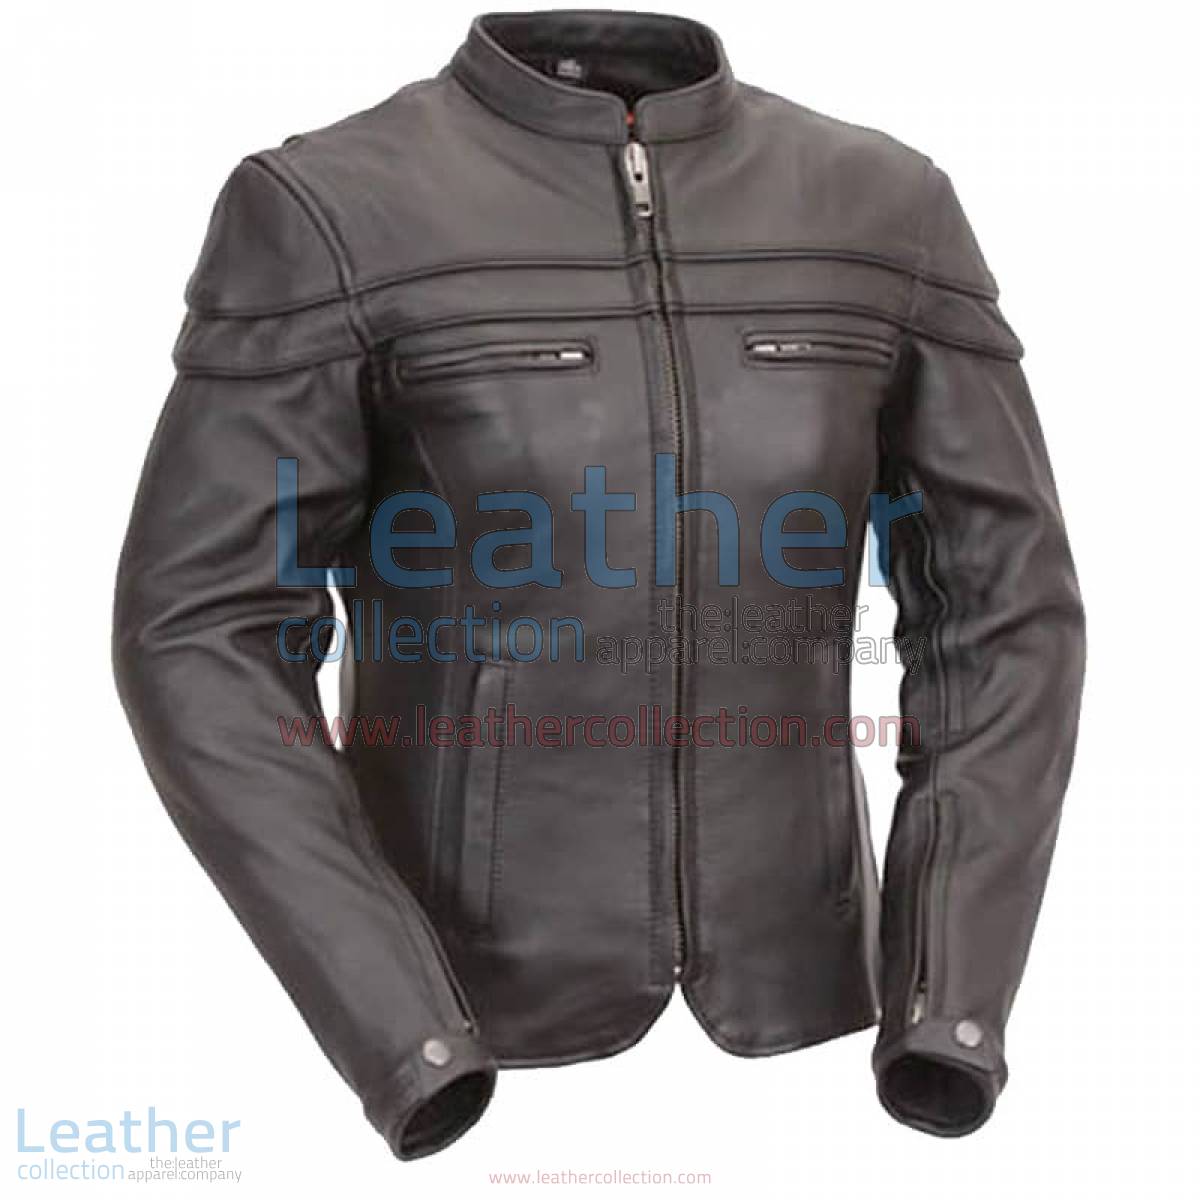 Leather Rider Touring Jacket with Sleeve & Pocket Vents